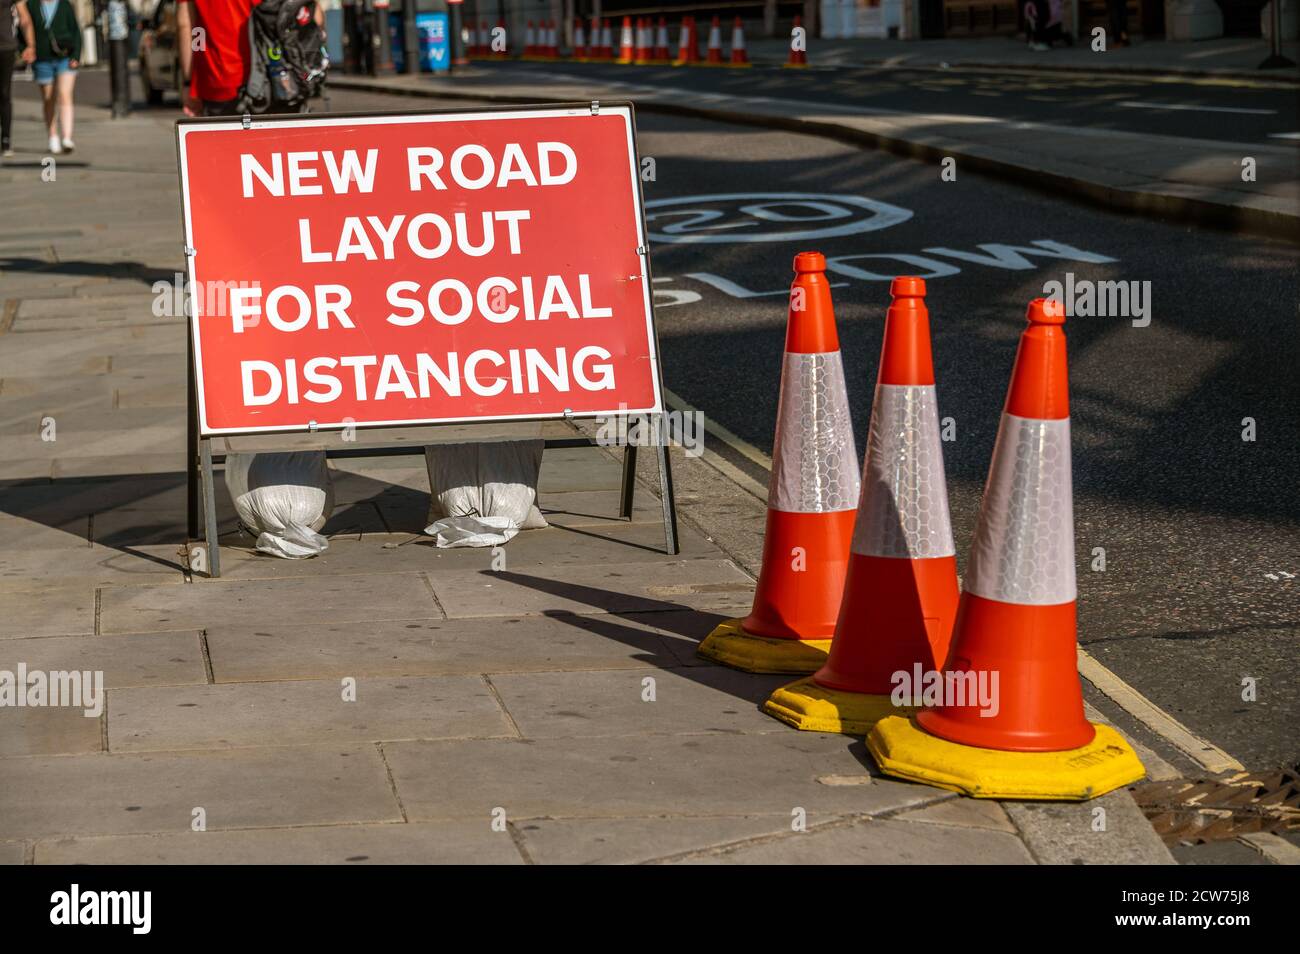 LONDON - SEPTEMBER 13, 2020: A UK road sign with orange traffic cones telling users that the layout has changed to allow for social distancing during Stock Photo